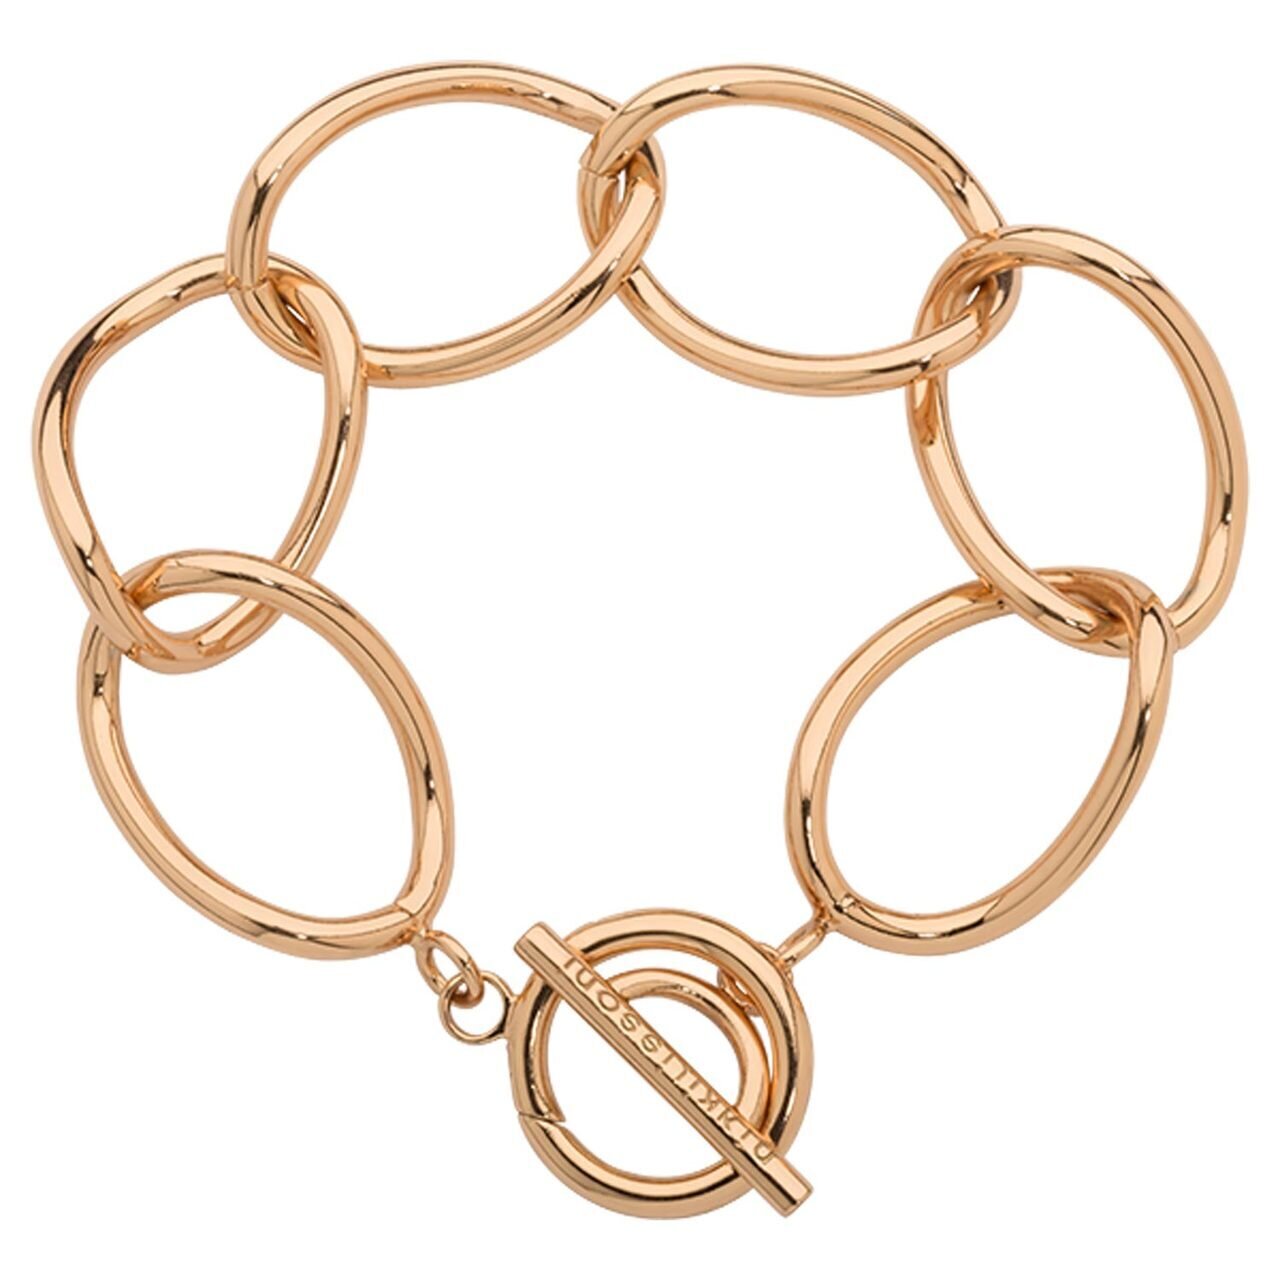 Nikki Lissoni Rose Gold-plated Bracelet of 21cm with 6 Links of 27 x 37mm A T-Bar Closure B1132RG21